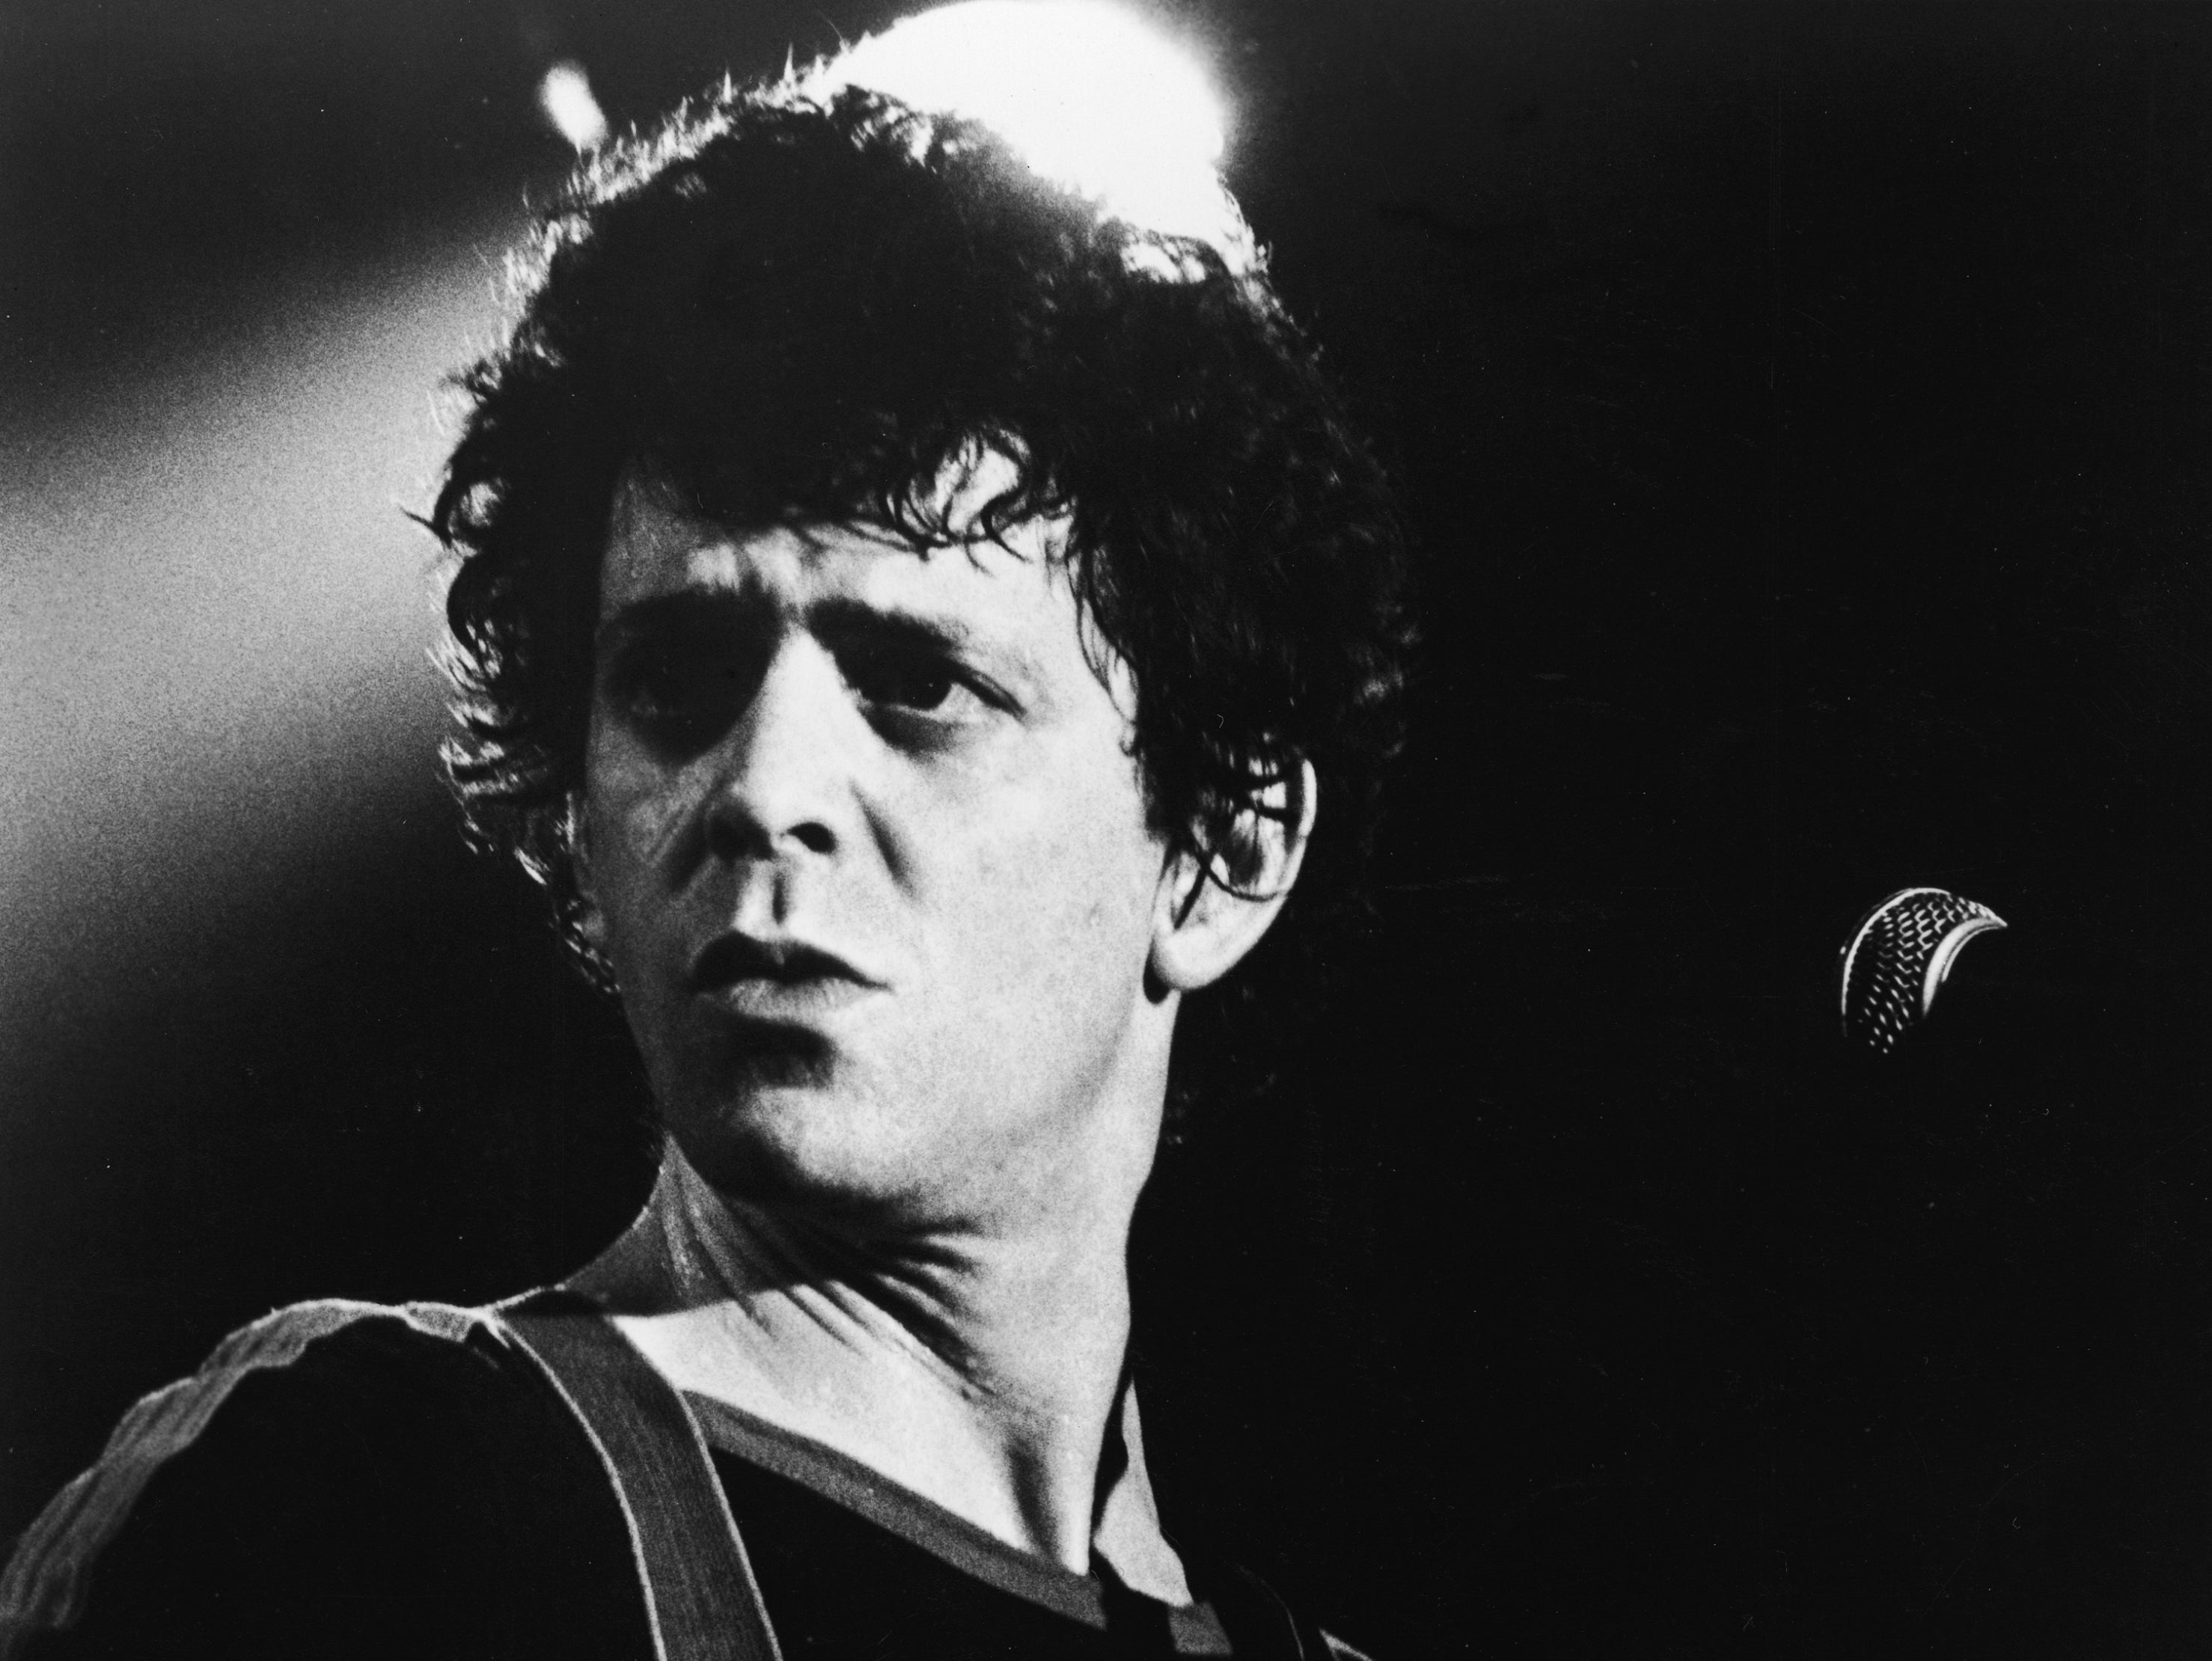 Lou Reed on stage with a guitar, 1970s